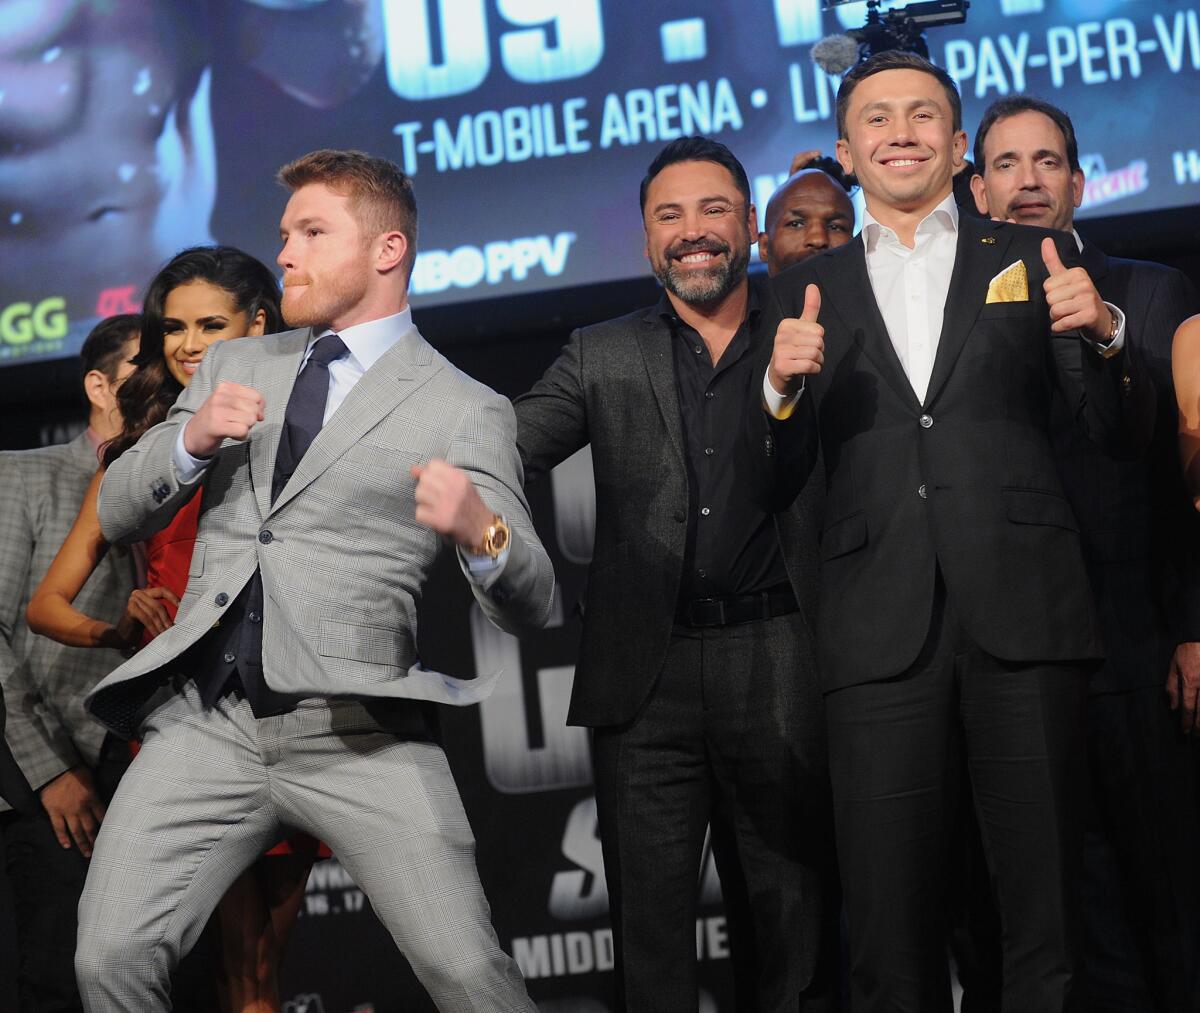 NEW YORK, NY - JUNE 20: (L-R) Lineal & RING Magazine Middleweight World Champ Canelo Alvarez, Oscar De La Hoya and Gennadi Golovkin attend the Canelo Alvarez and Gennady Golovkin Press Tour at The Theater at Madison Square Garden on June 20, 2017 in New York City. *